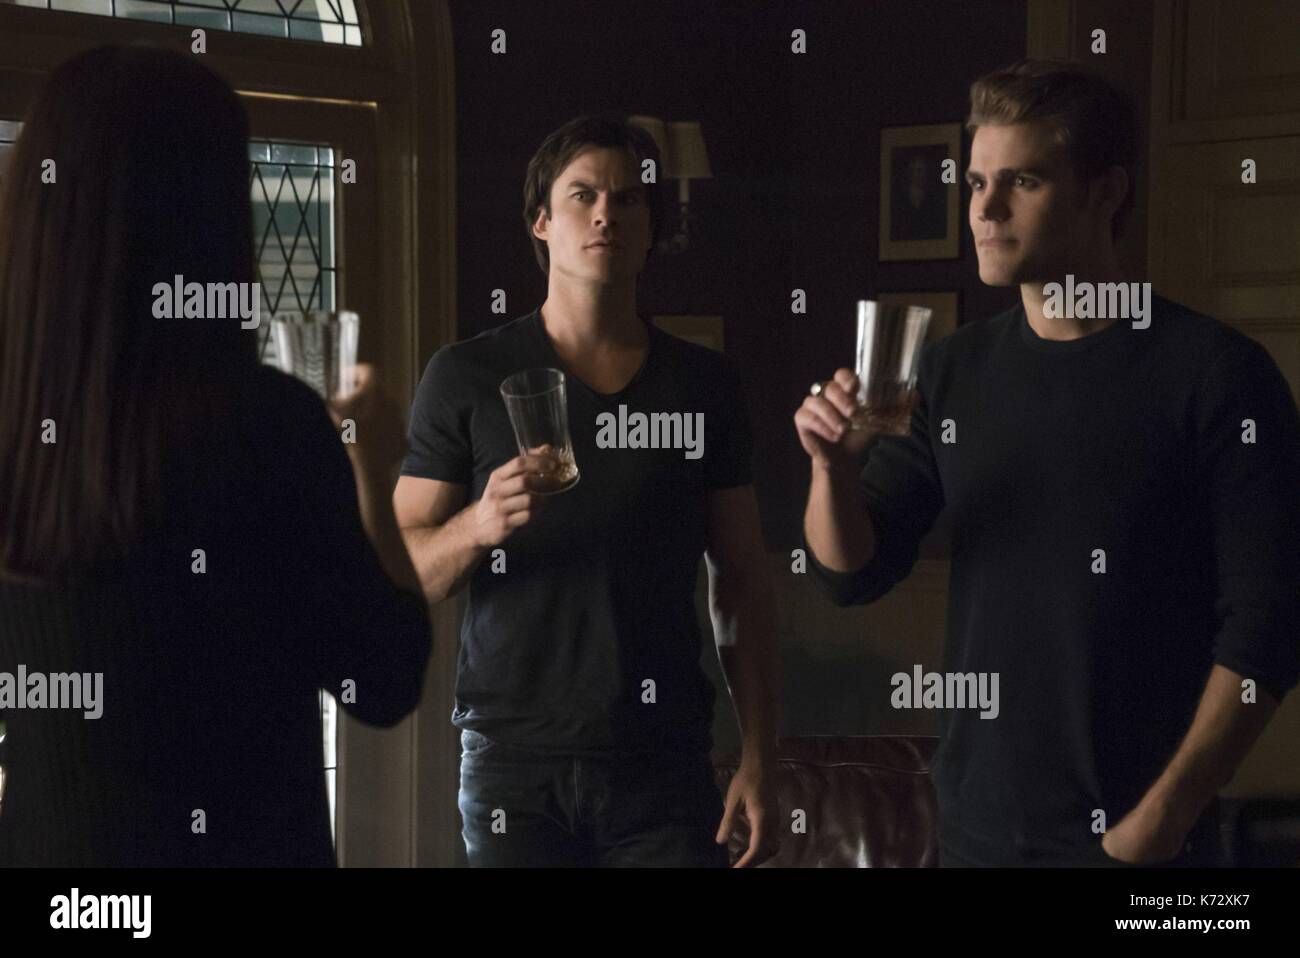 The The Vampire Diaries  TV Series 2009 USA  Created by  Julie Plec, Kevin Williamson   2015 Season 7, episode 7 : Mommie Dearest  Director :  Tony Solomons  Annie Wersching, Ian Somerhalder, Paul Wesley.  It is forbidden to reproduce the photograph out of context of the promotion of the film. It must be credited to the Film Company and/or the photographer assigned by or authorized by/allowed on the set by the Film Company. Restricted to Editorial Use. Photo12 does not grant publicity rights of the persons represented. Stock Photo